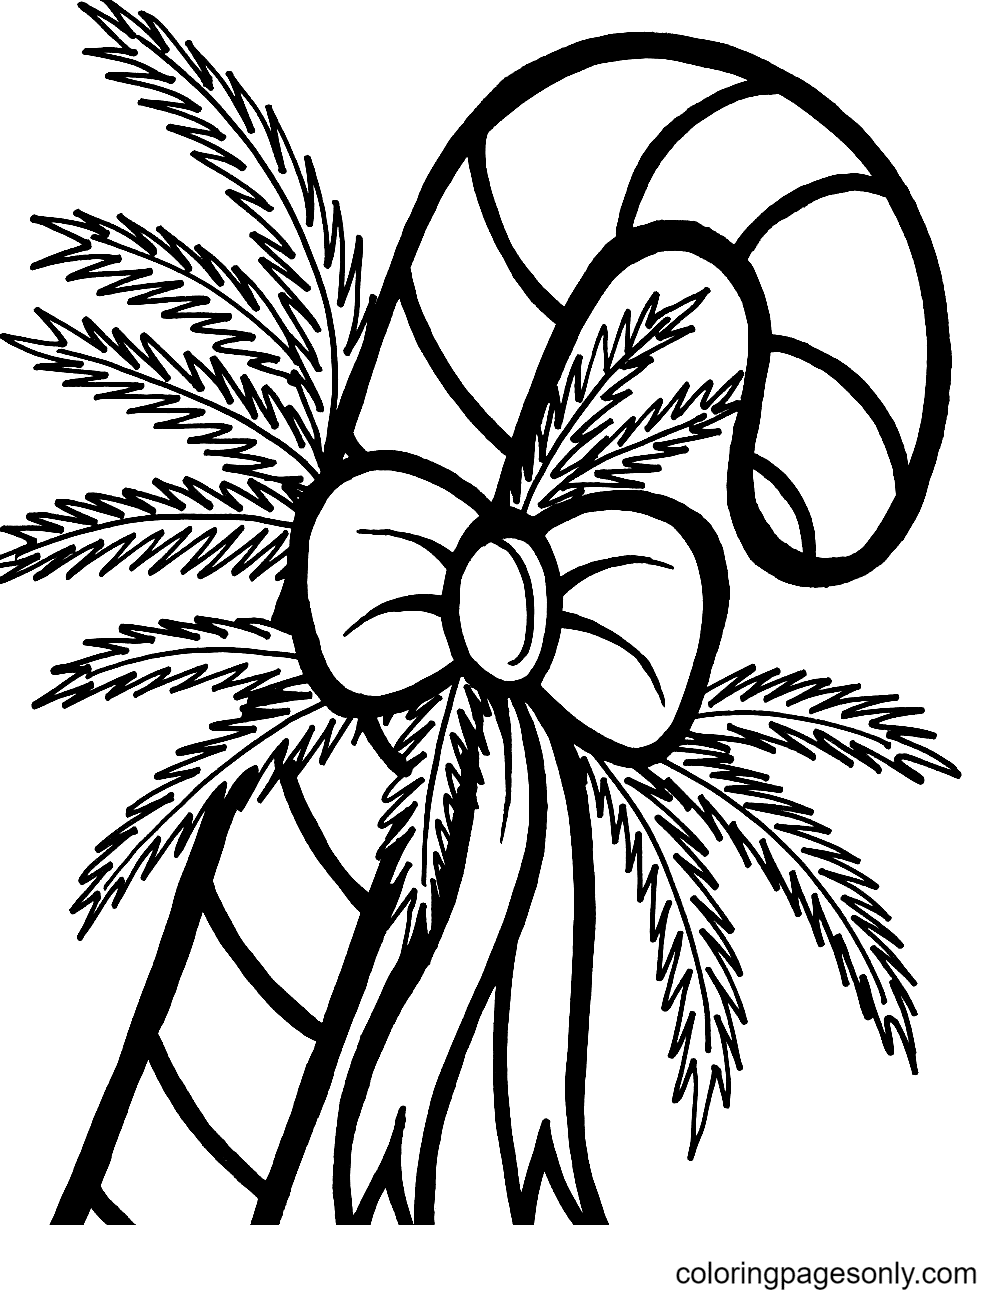 Candy Cane Free Coloring Page